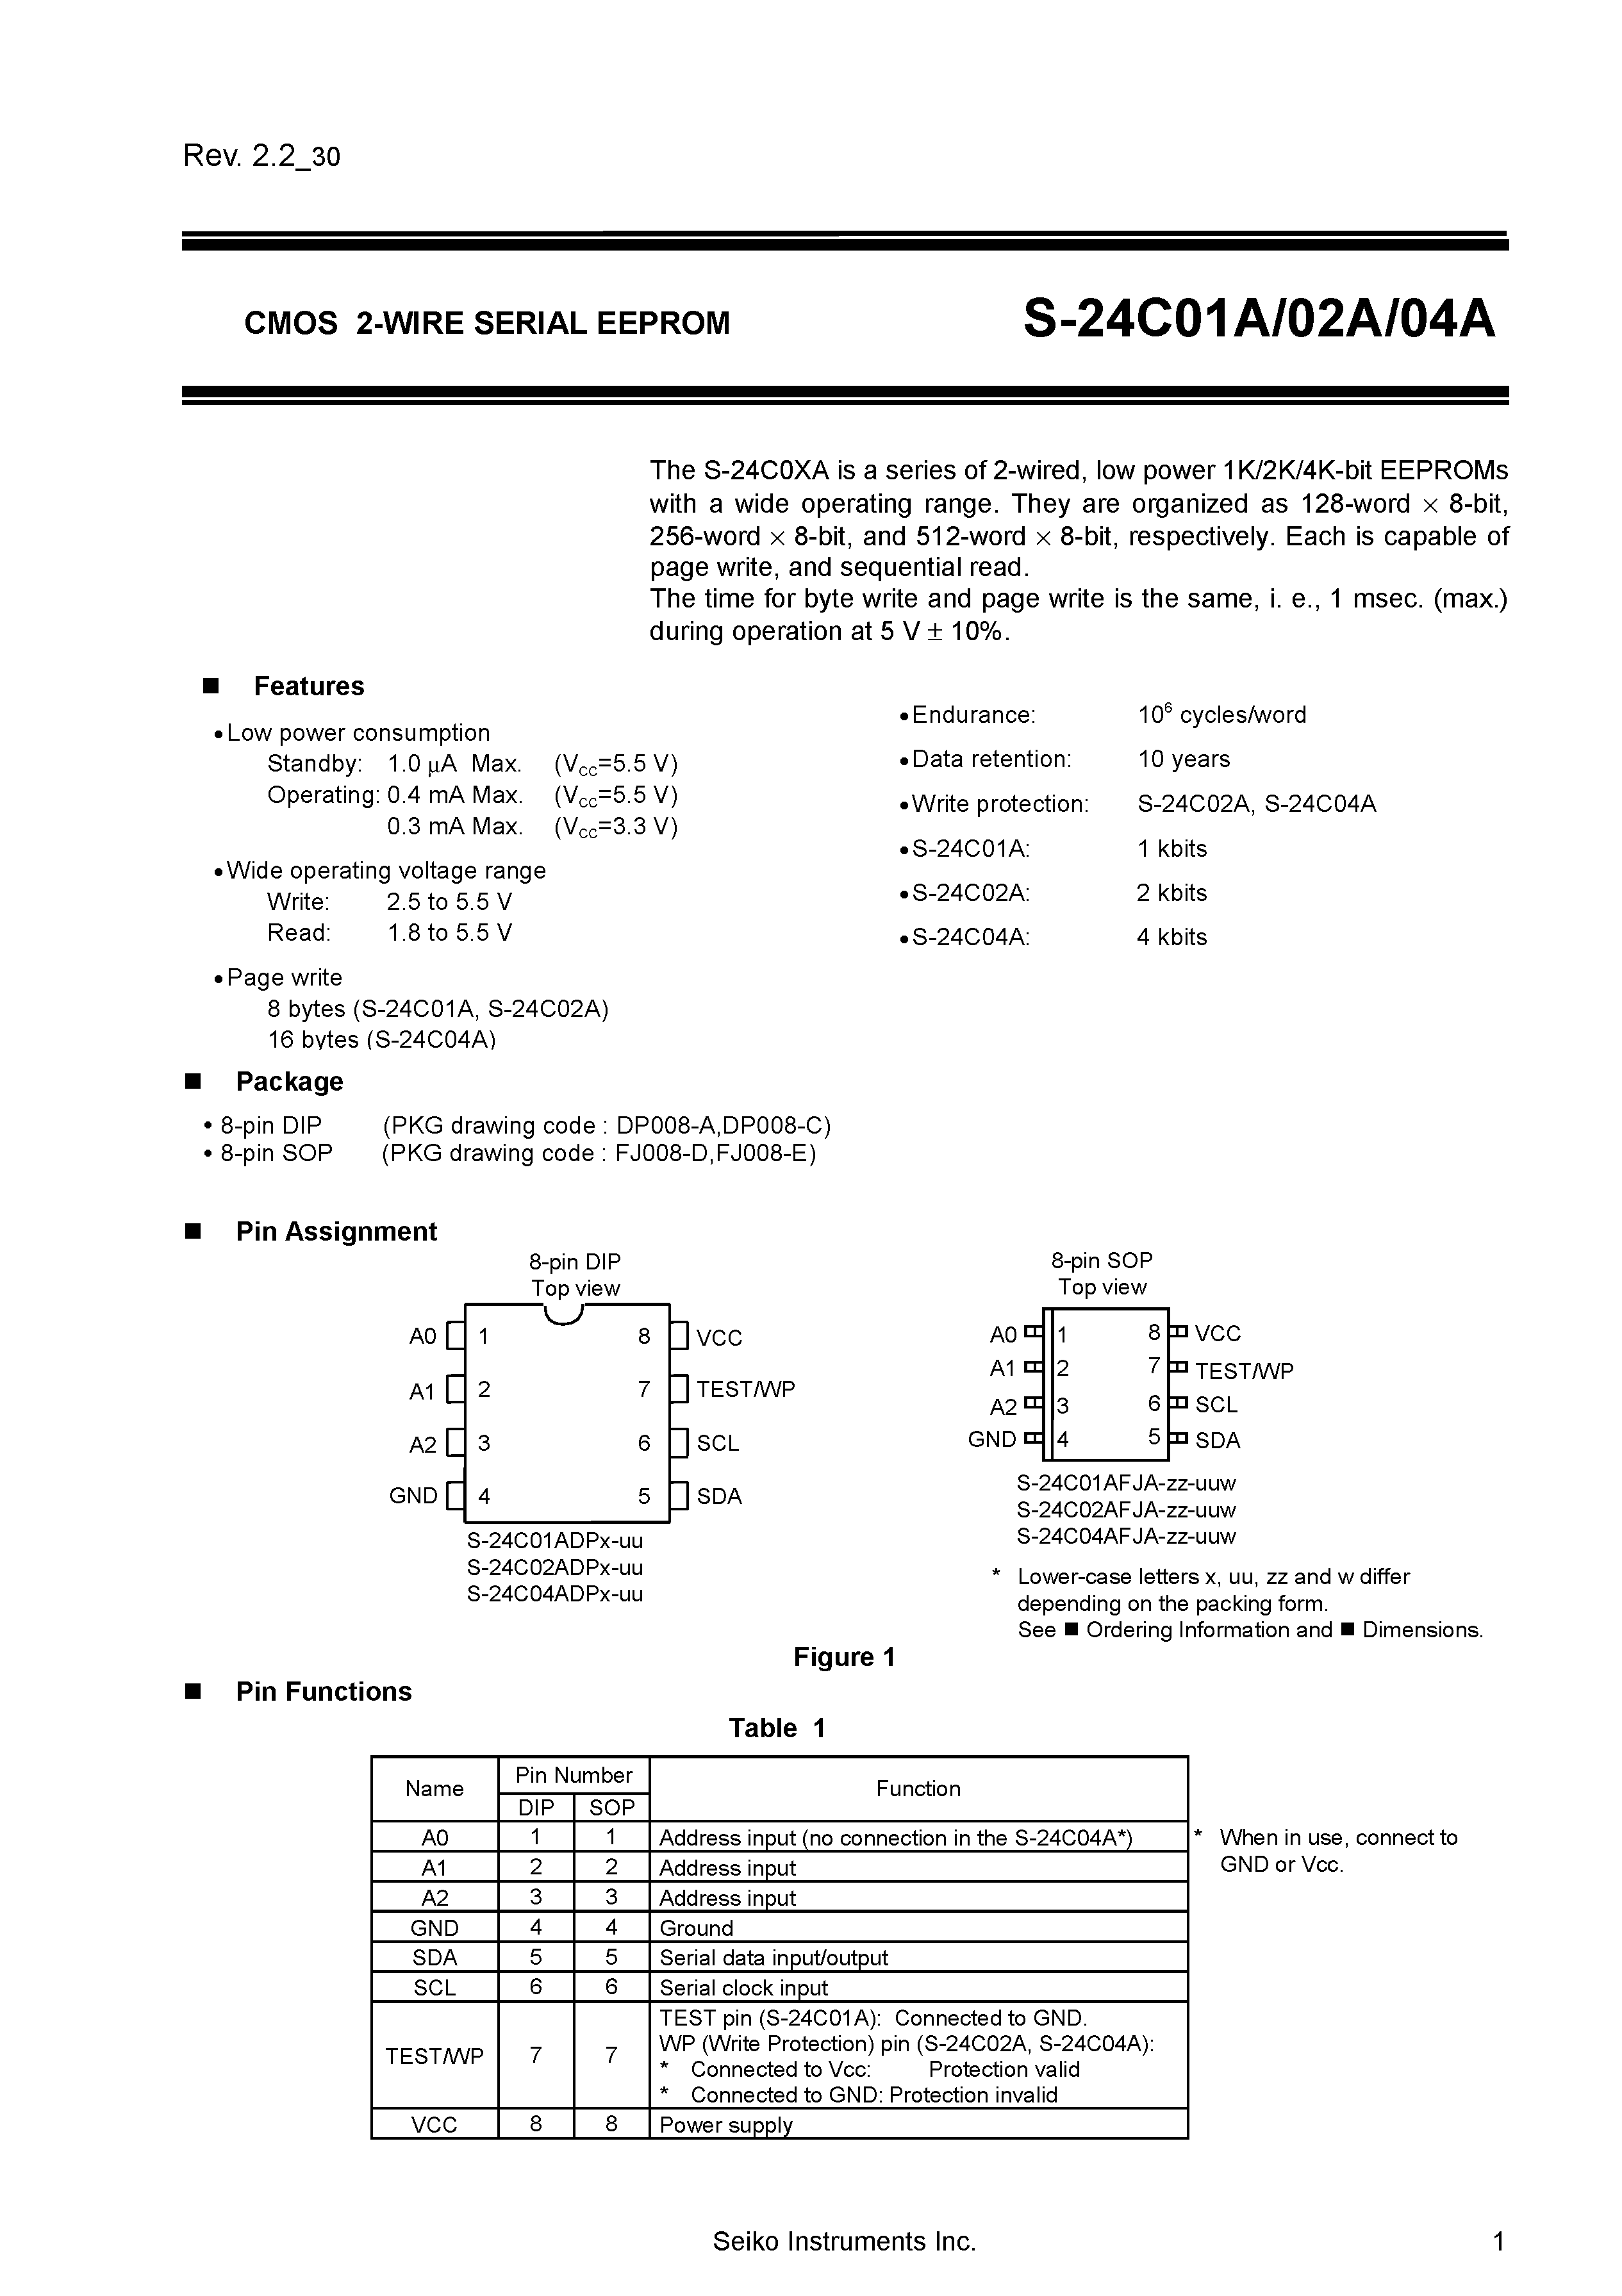 Datasheet S-24C04ADPA-11-S - CMOS 2-WIRE SERIAL EEPROM page 1